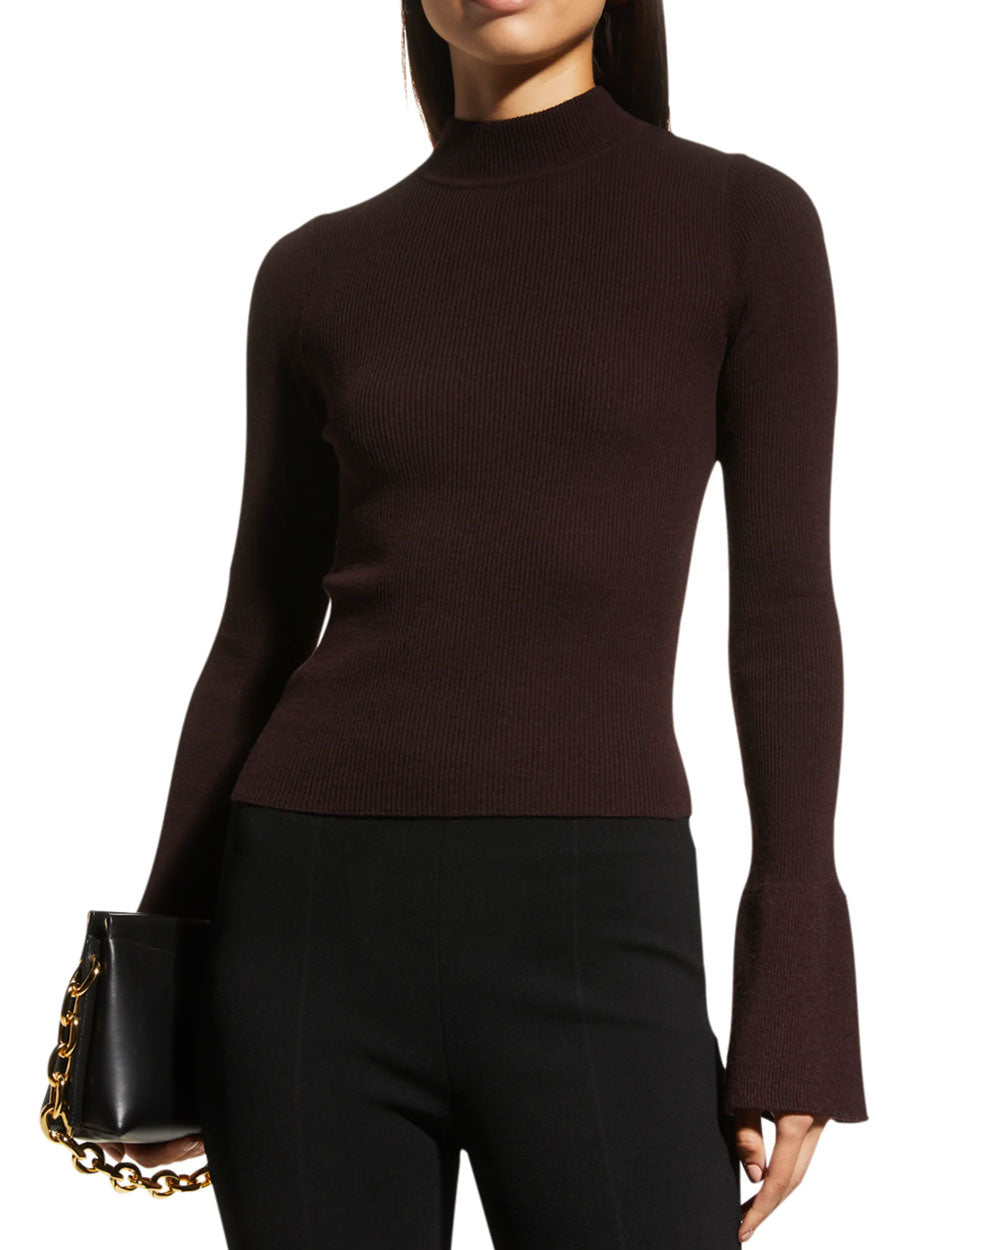 Chocolate Devin Knit Sweater